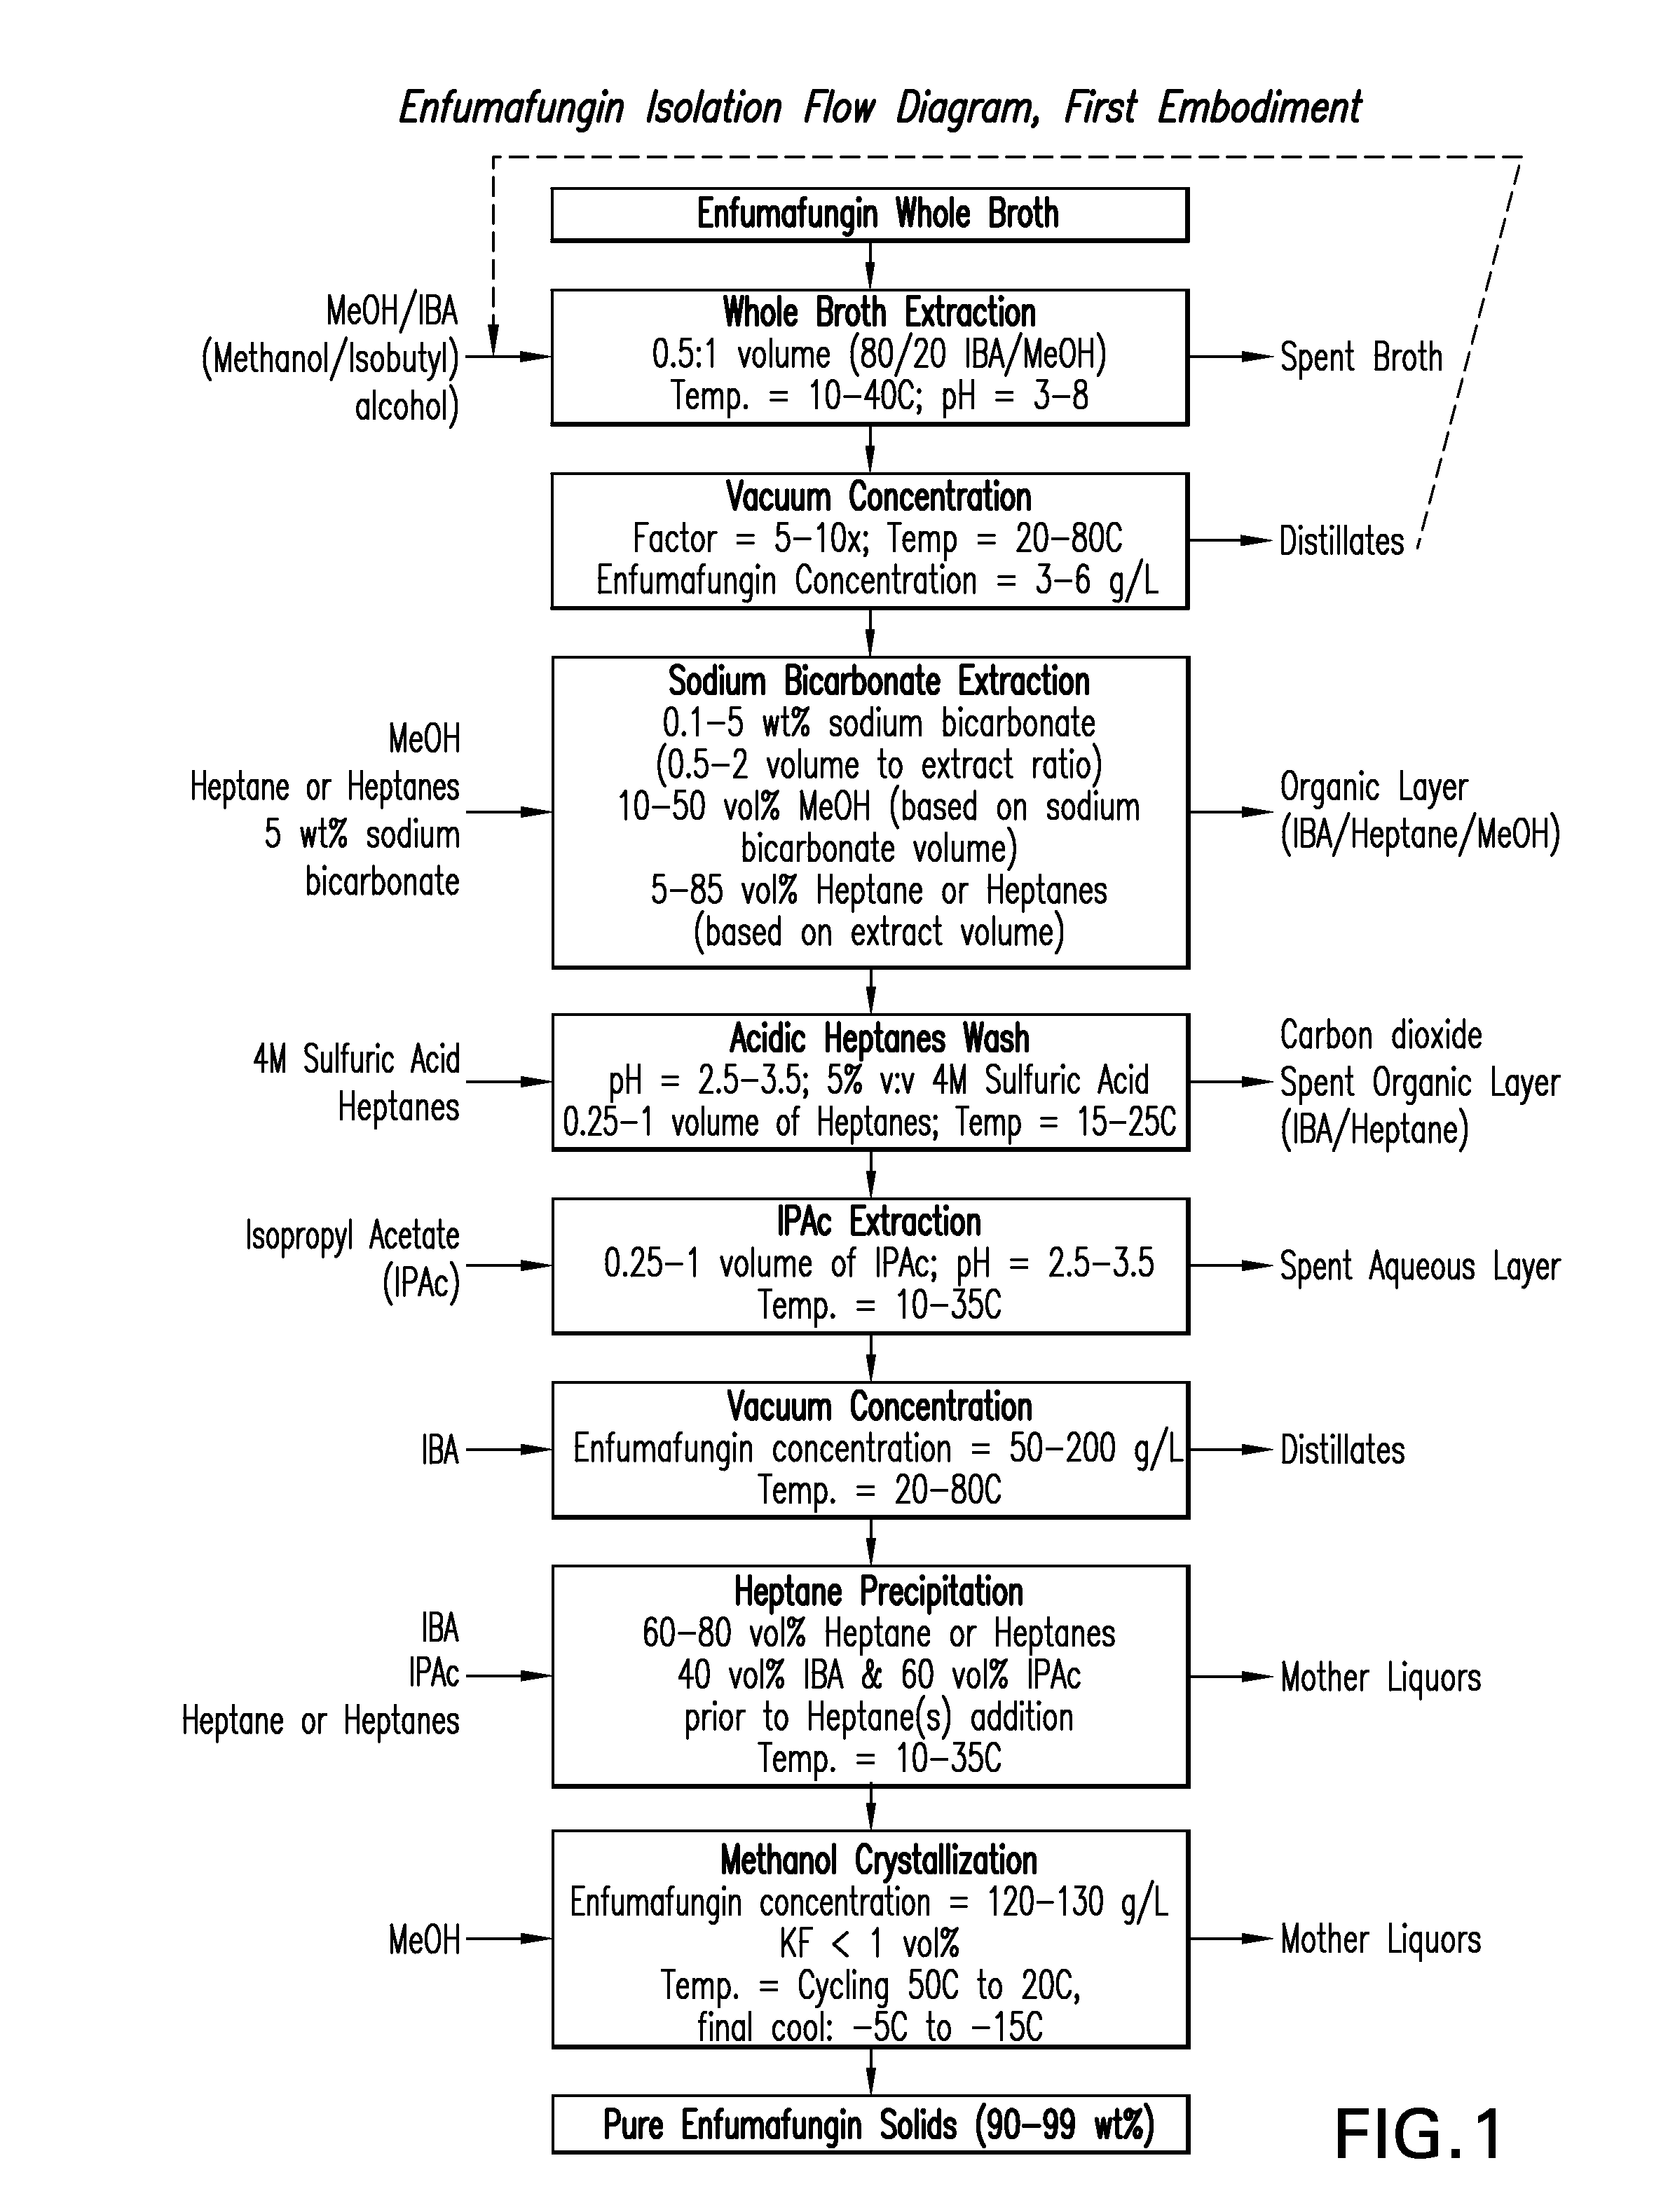 Processes for isolation and purification of enfumafungin